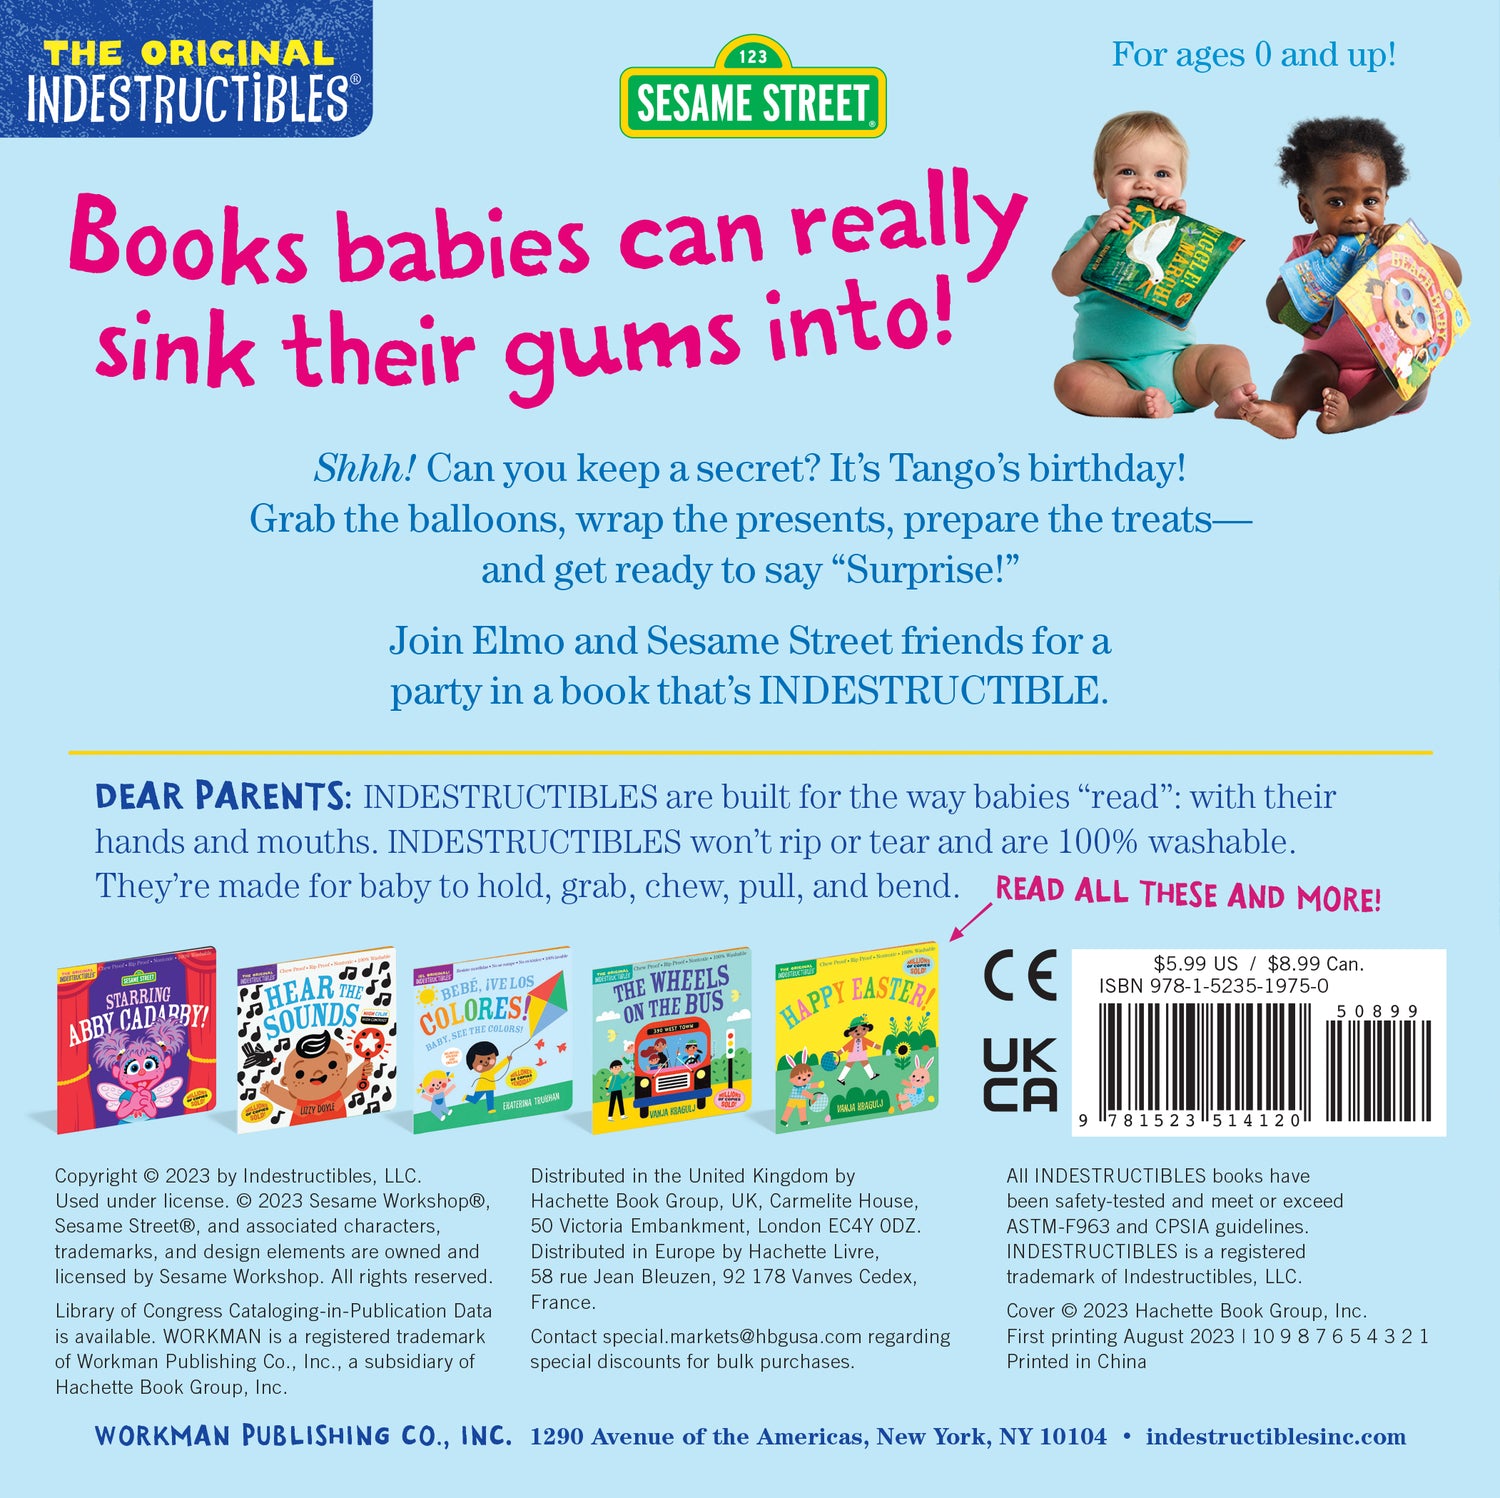 Indestructibles: Sesame Street: Elmo Says Surprise!: Chew Proof · Rip Proof · Nontoxic · 100% Washable (Book for Babies, Newborn Books, Safe to Chew)